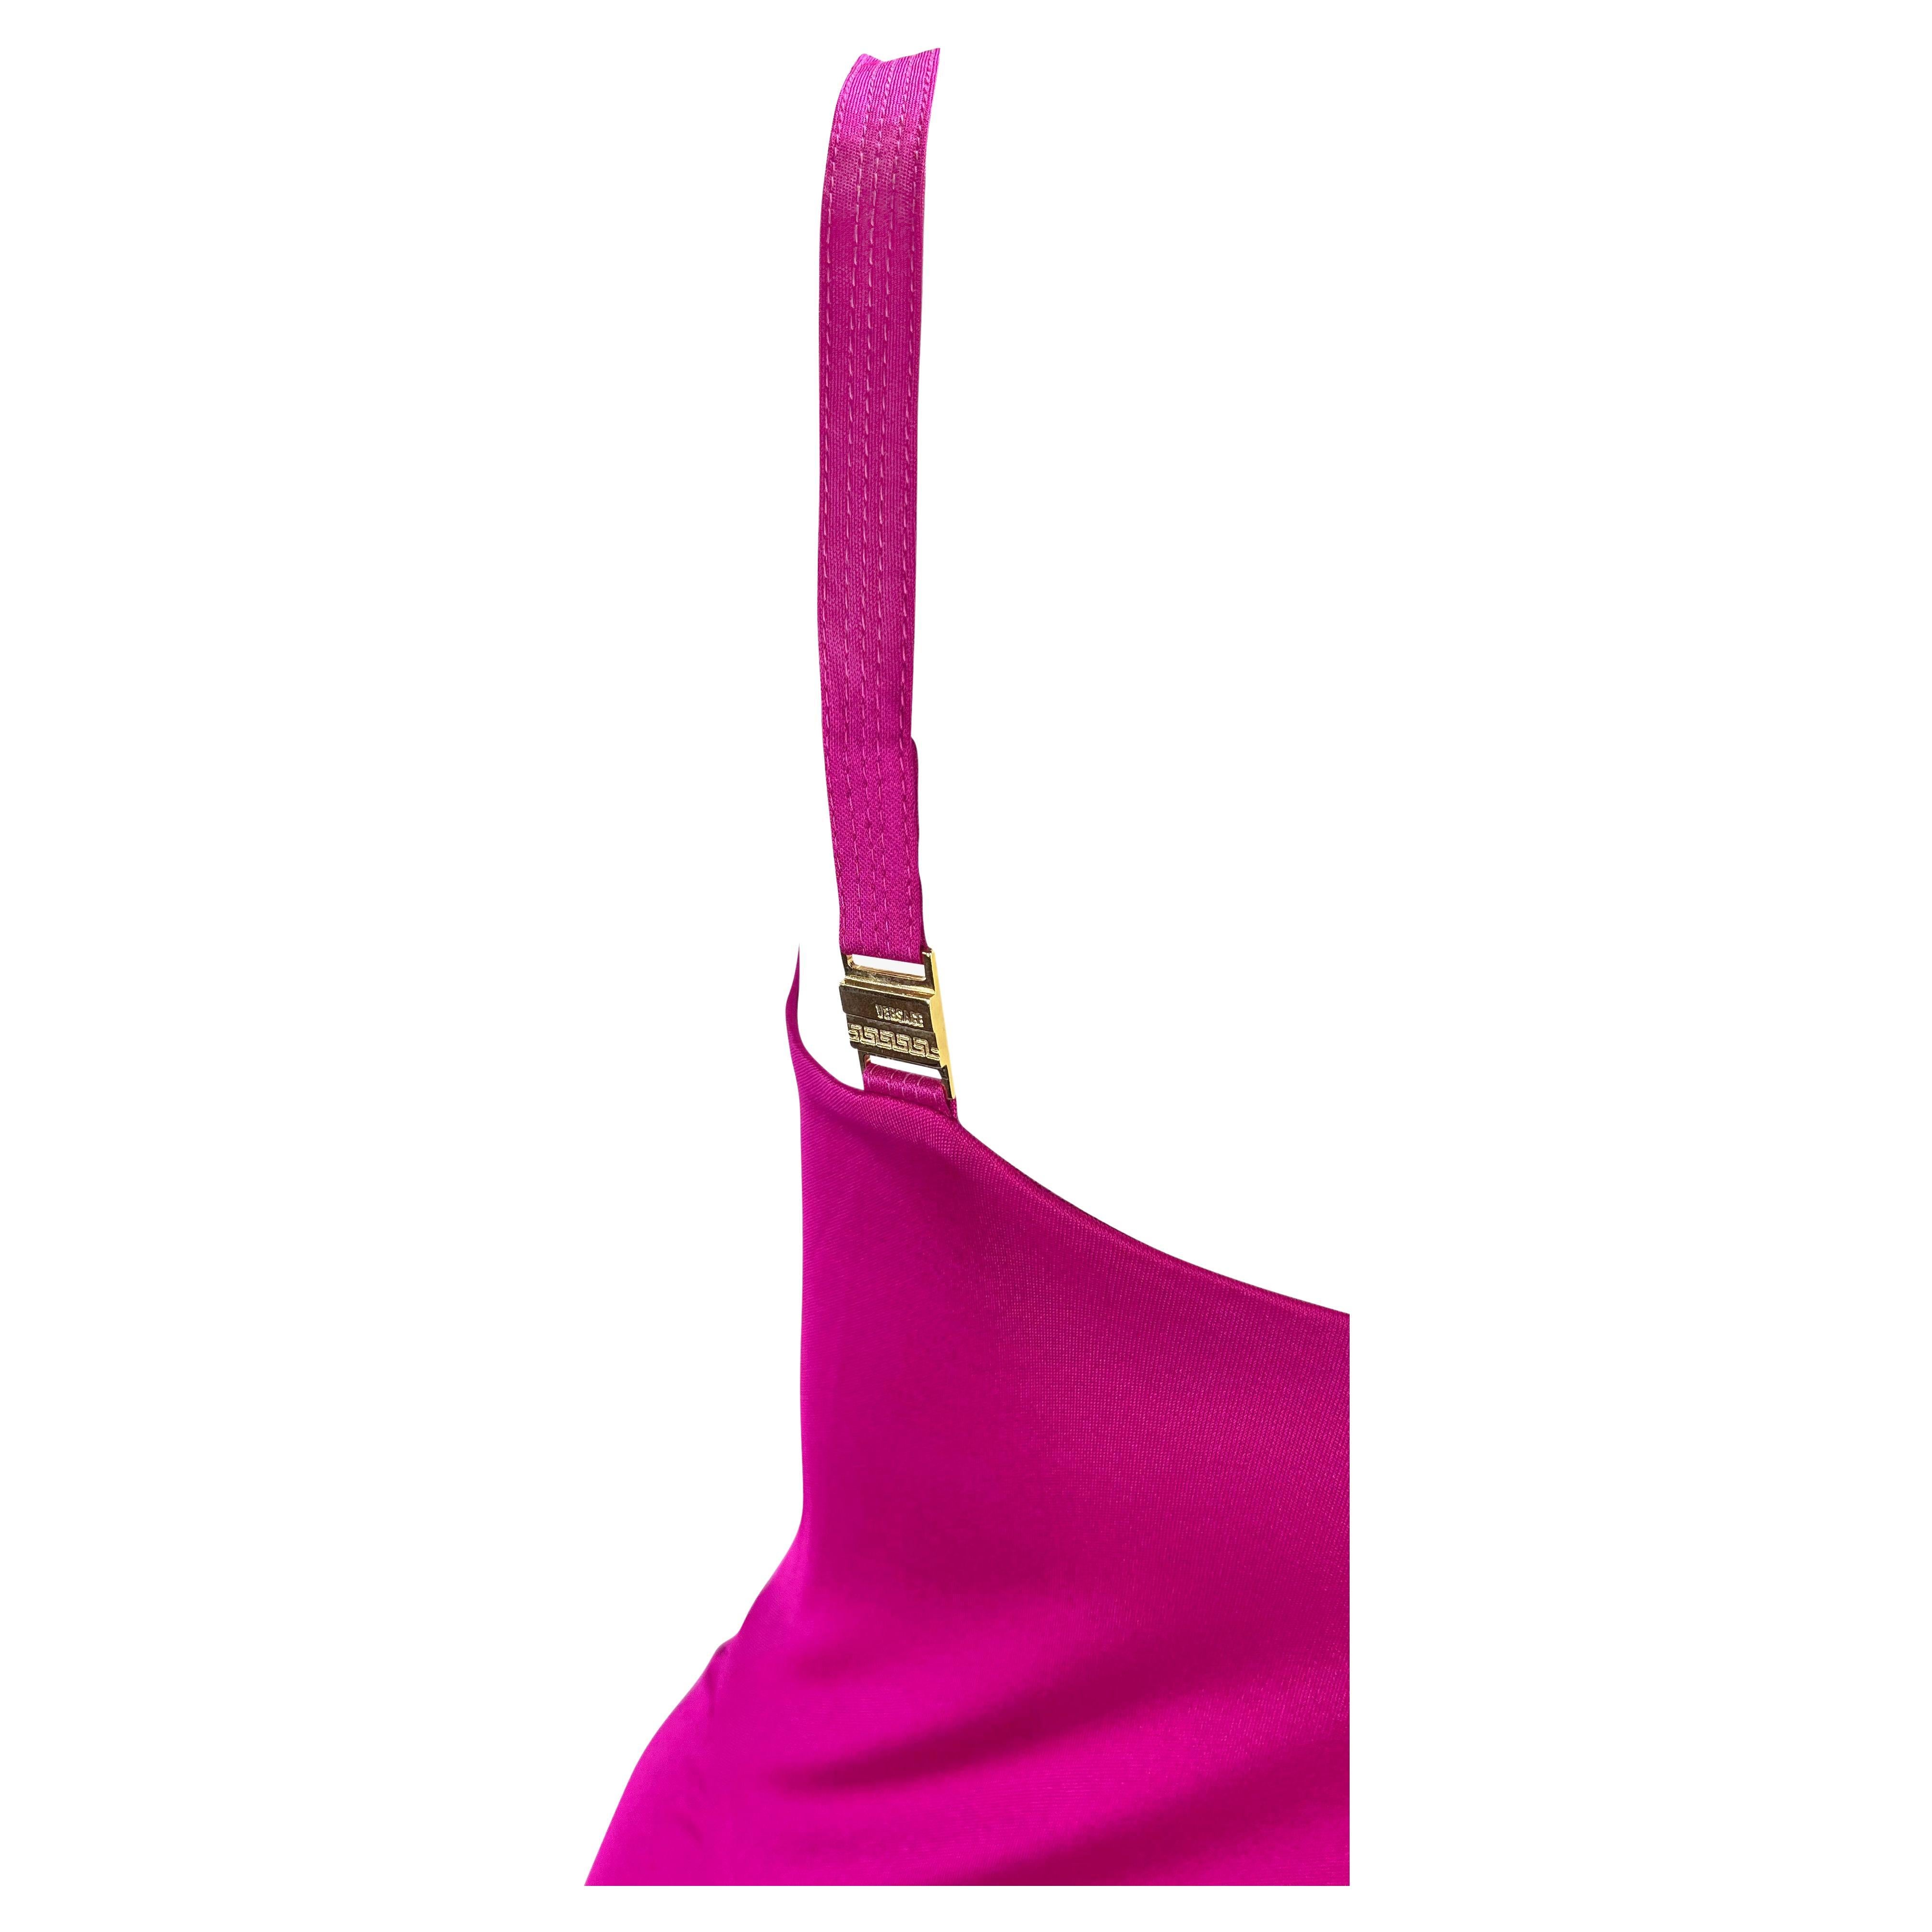 Presenting a gorgeous fuchsia Gianni Versace Couture slip dress, designed by Donatella Versace. From the early 2000s, this beautiful dress is a Y2K dream made complete with a cowl neck, flared hem, and thin straps. The dress is highlighted with